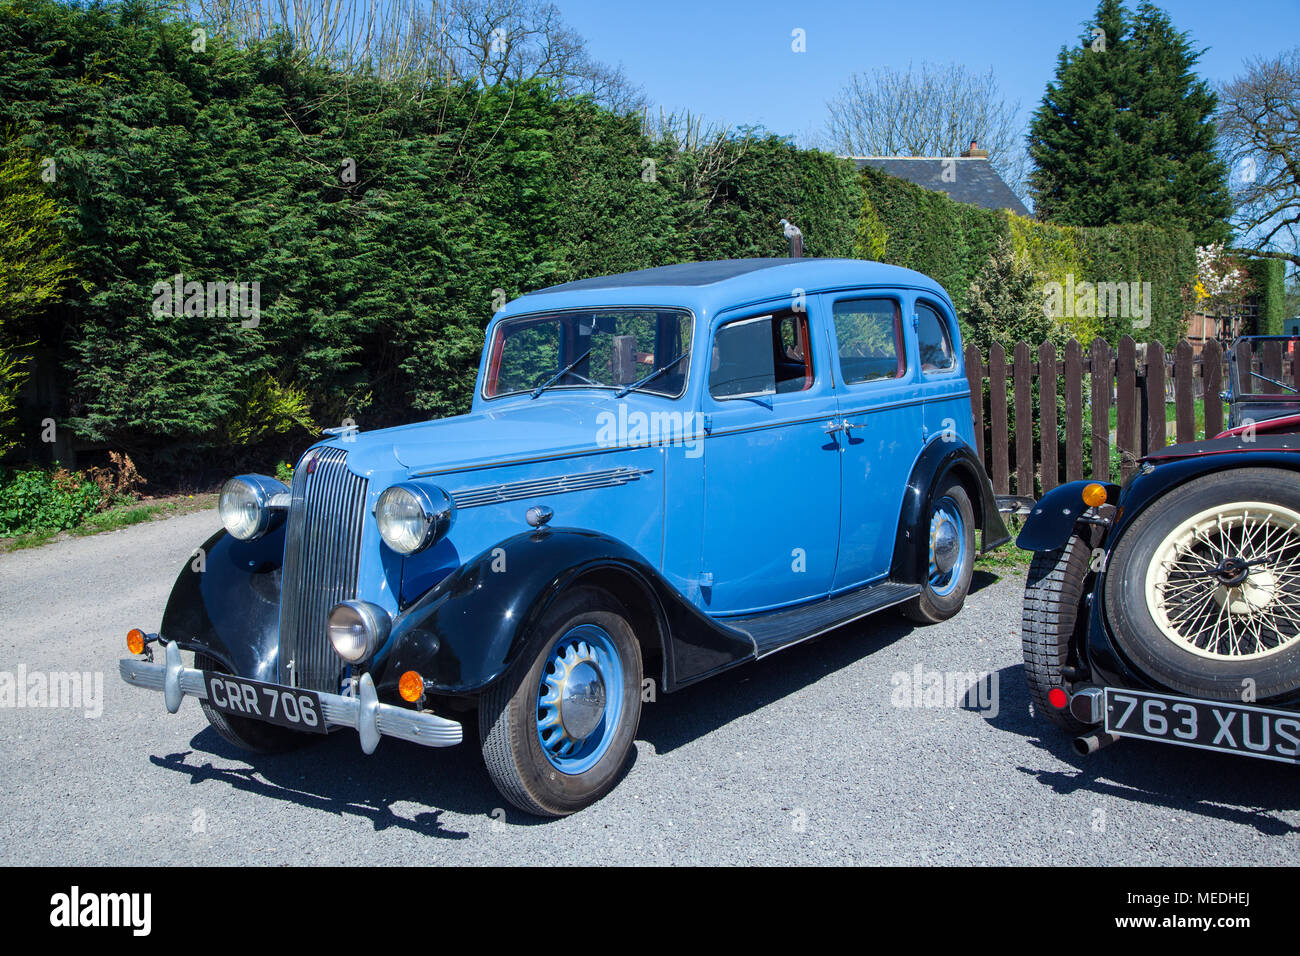 Blue Vintage Vauxhall motor  car in a pub car park in Wrenbury south Cheshire UK England Stock Photo